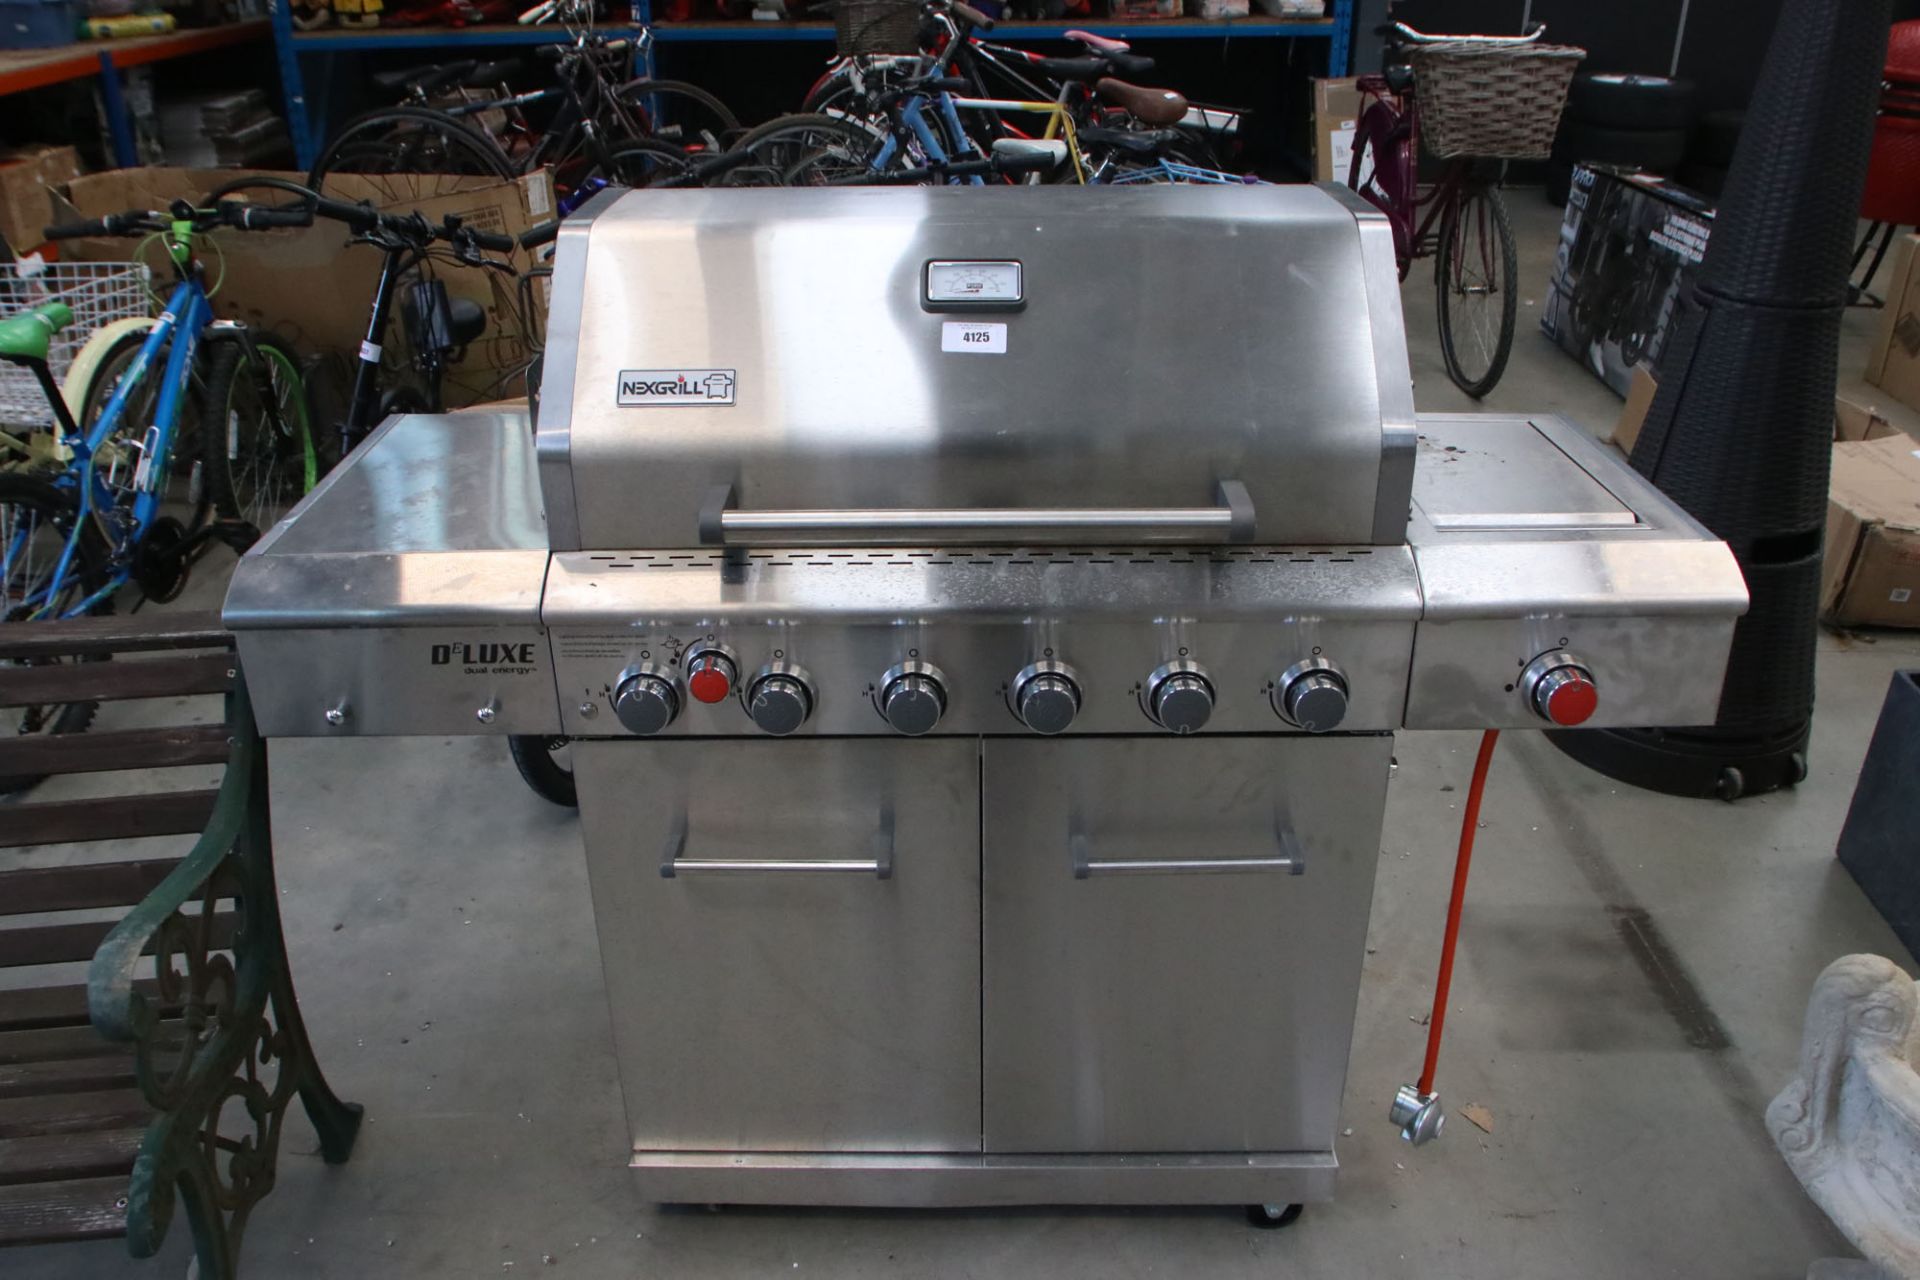 Nexgrill stainless steel large gas barbecue